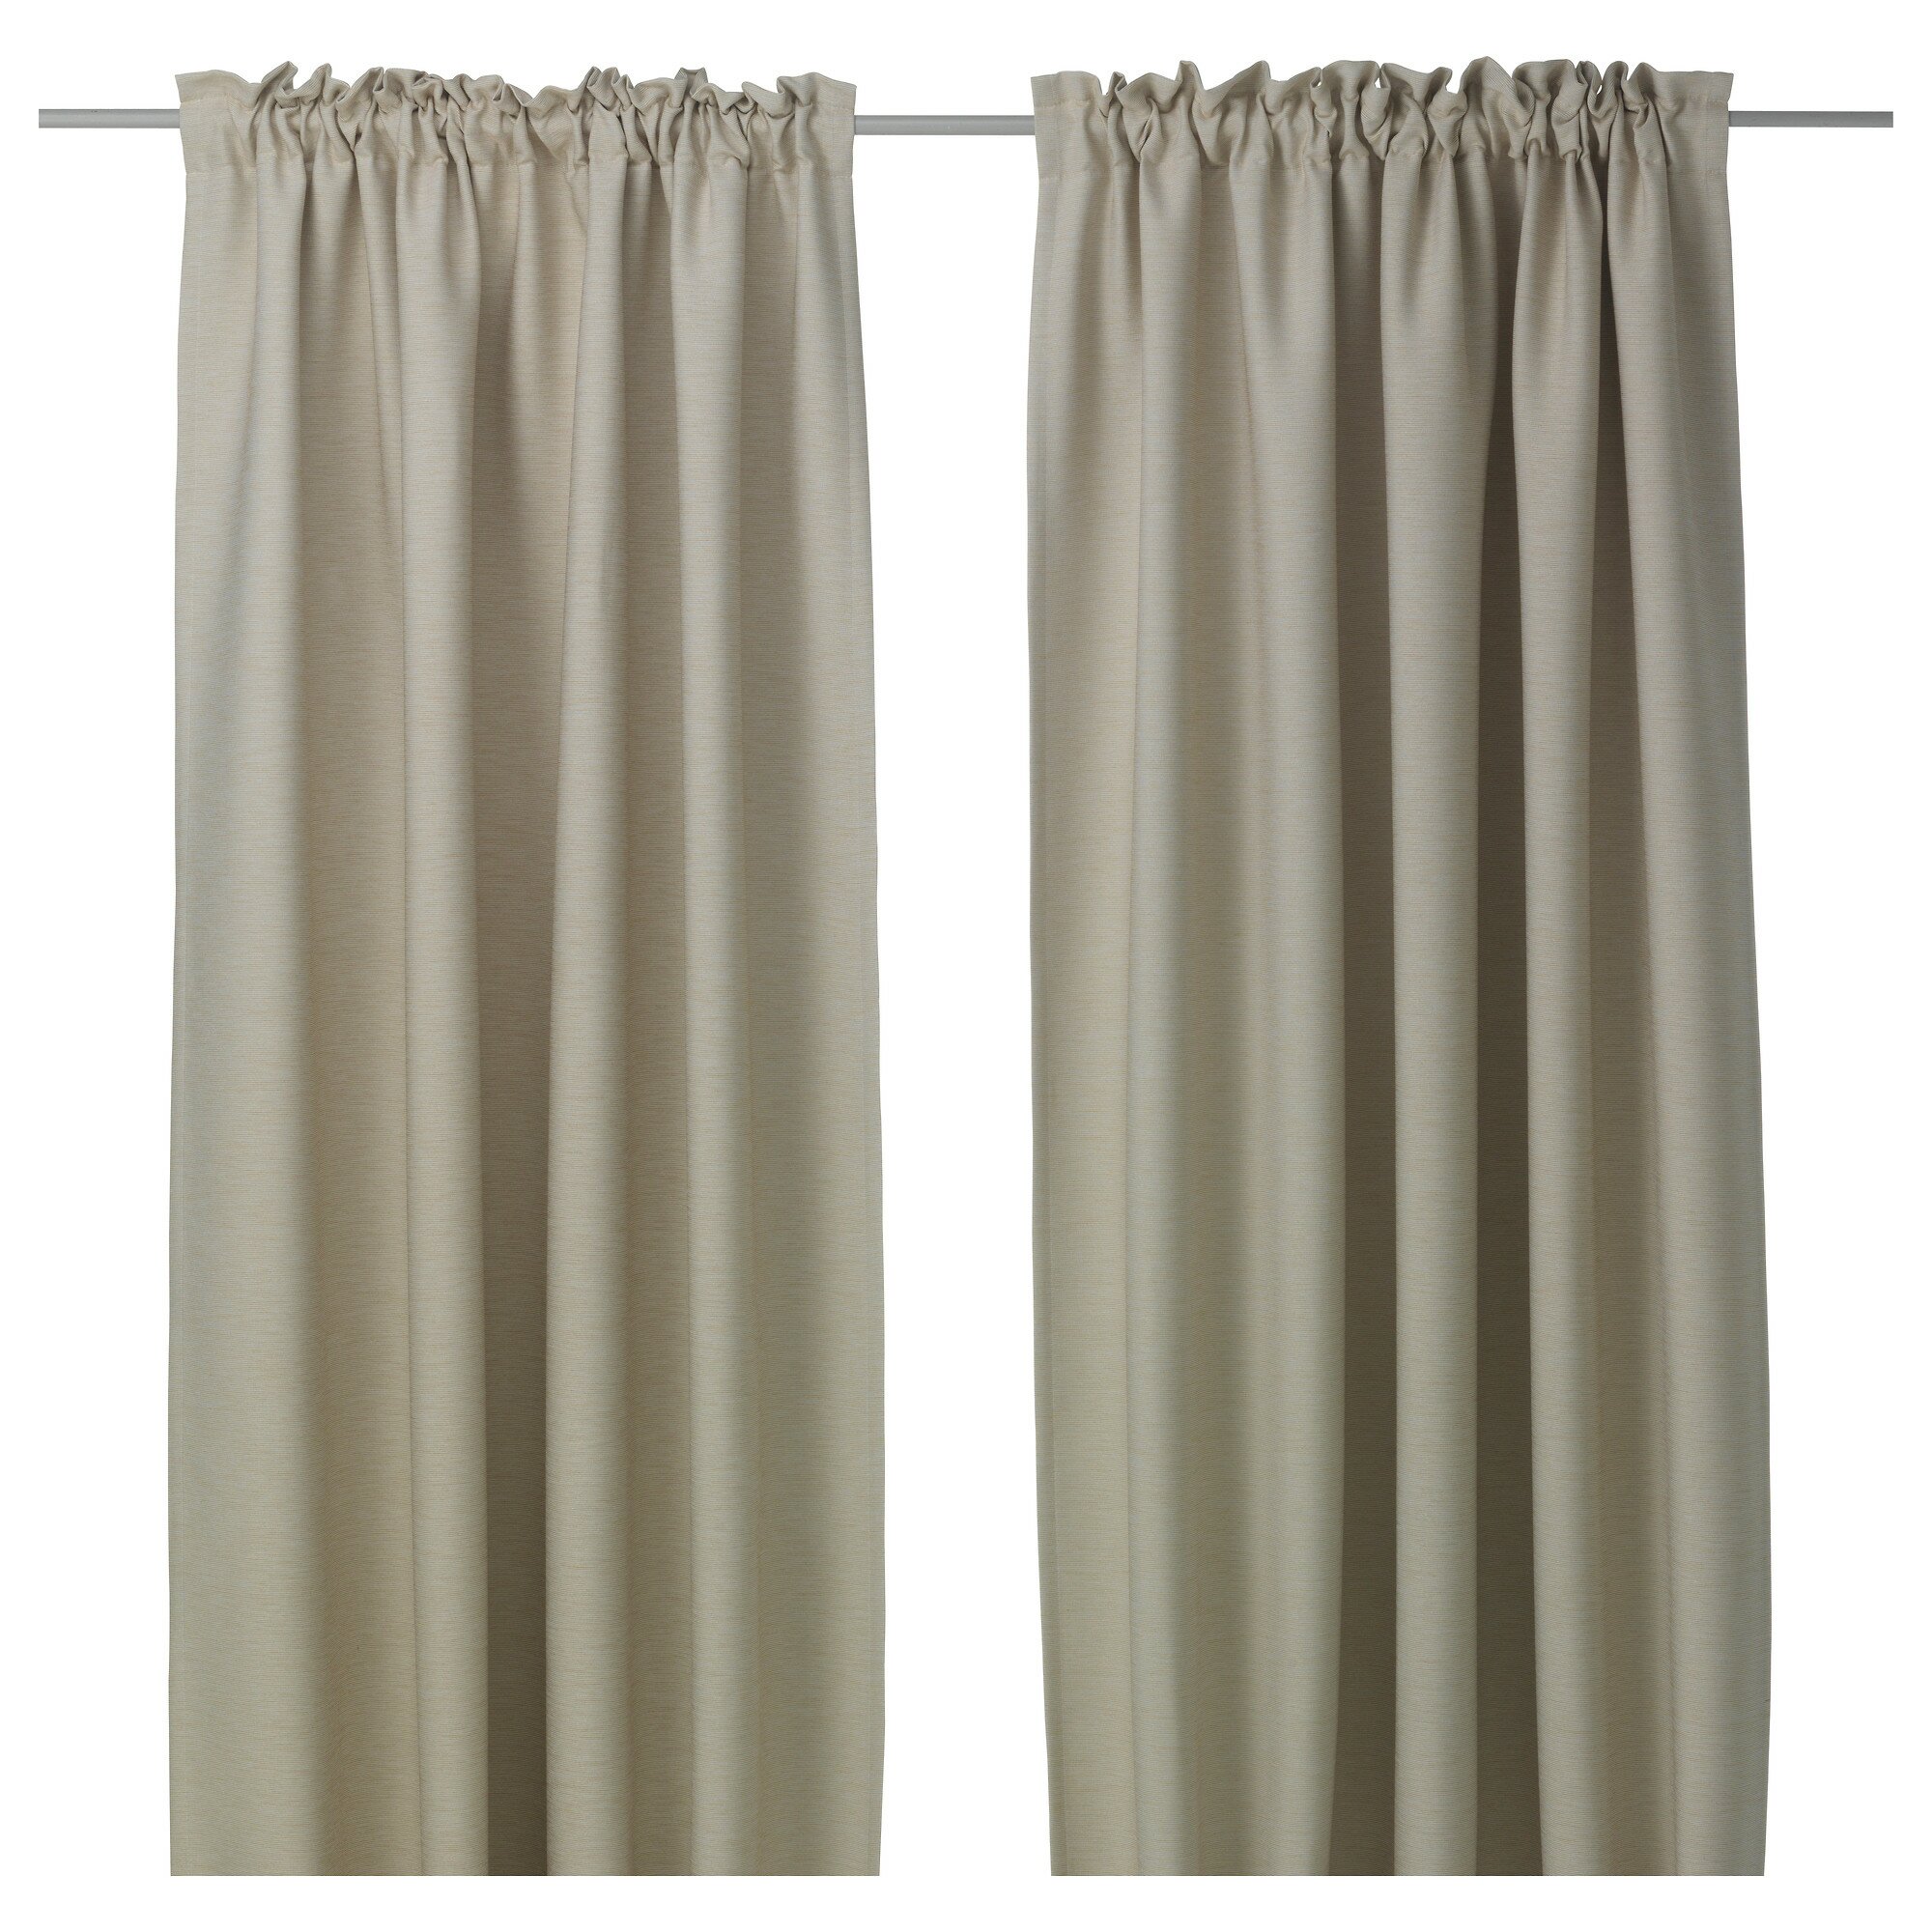 Cheap Blackout Curtains | Blackout Curtains Cheap | Low Priced Curtains